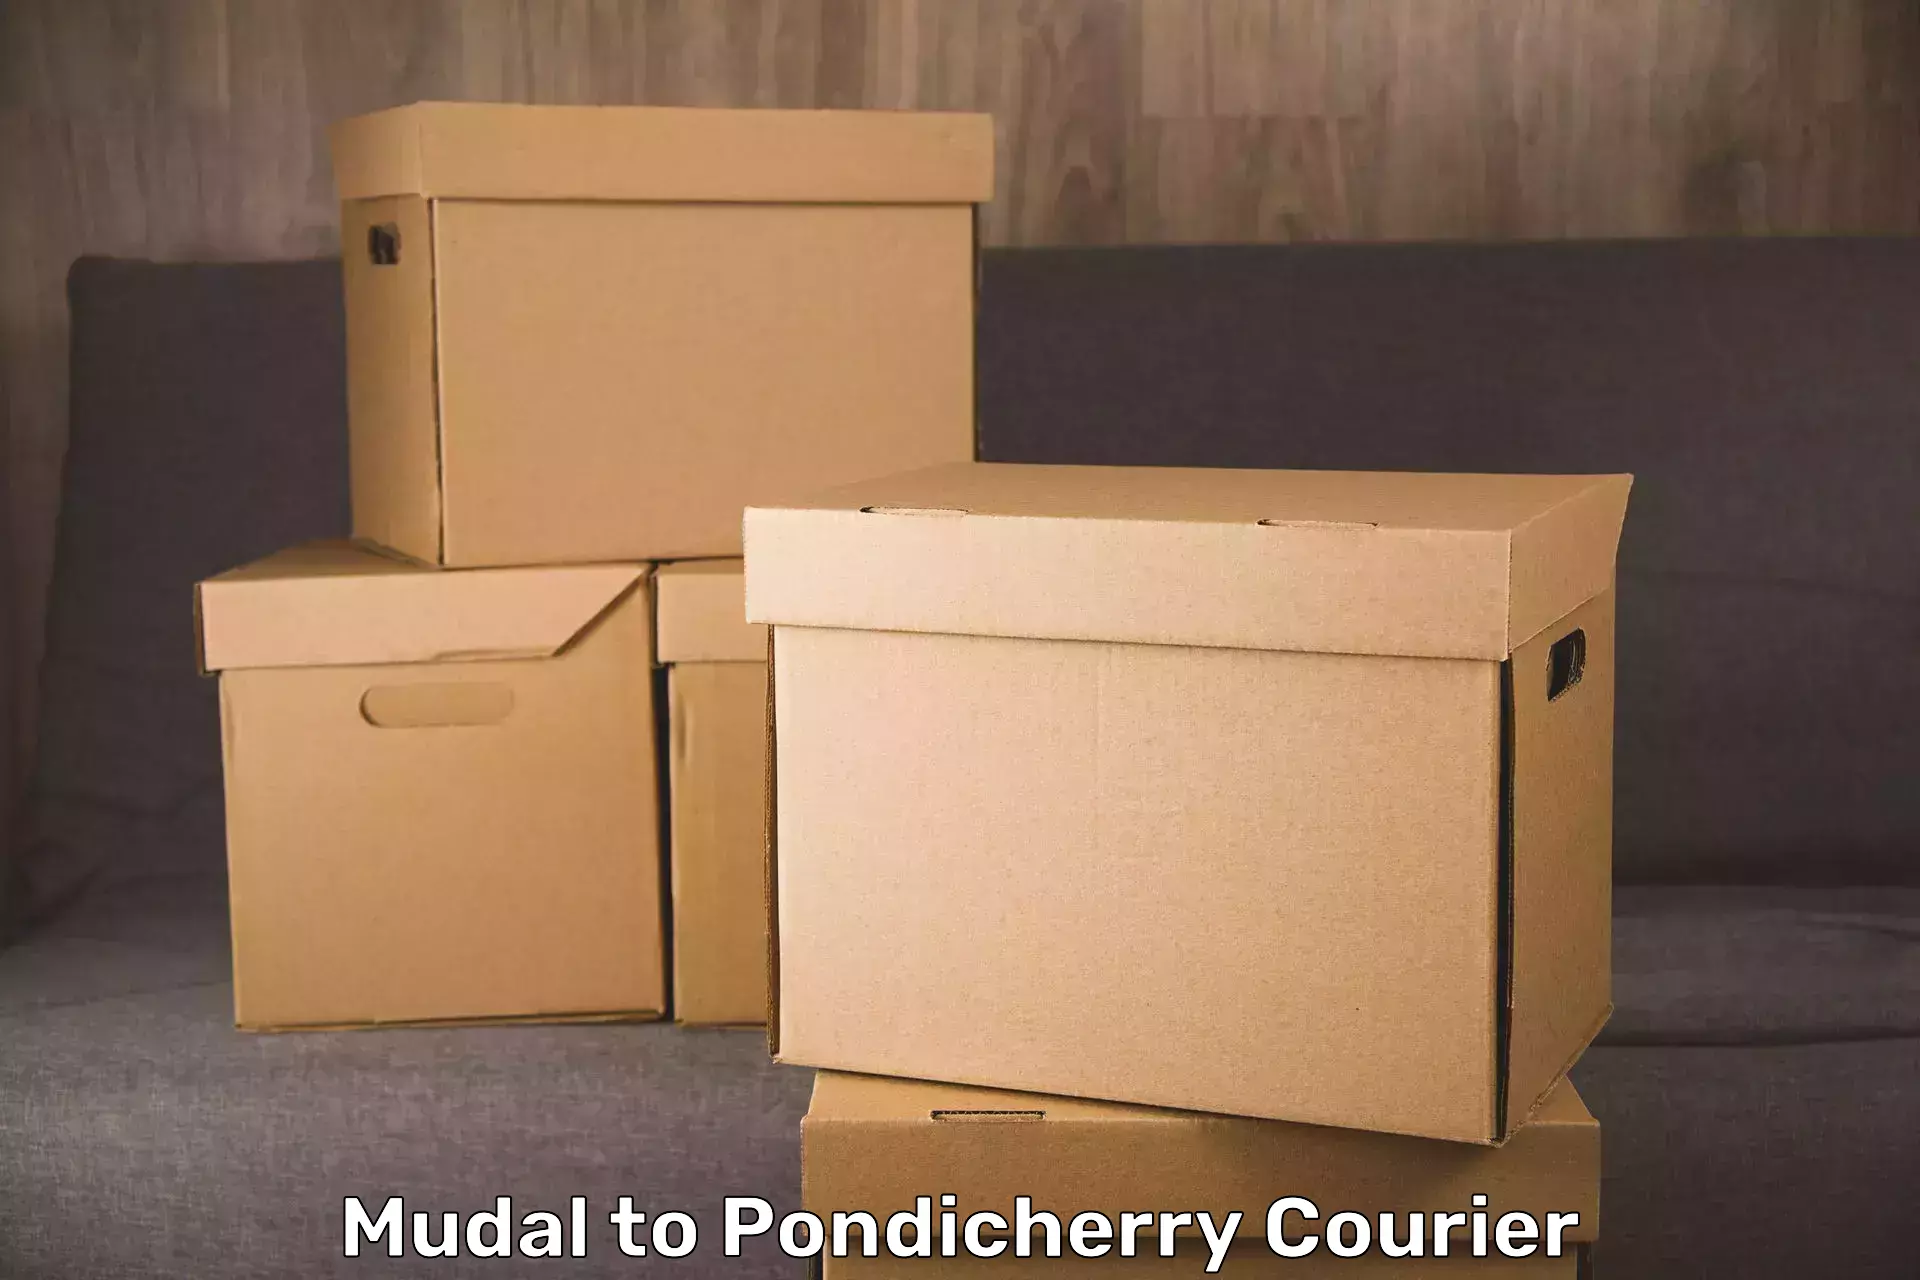 Luggage delivery app Mudal to Pondicherry University